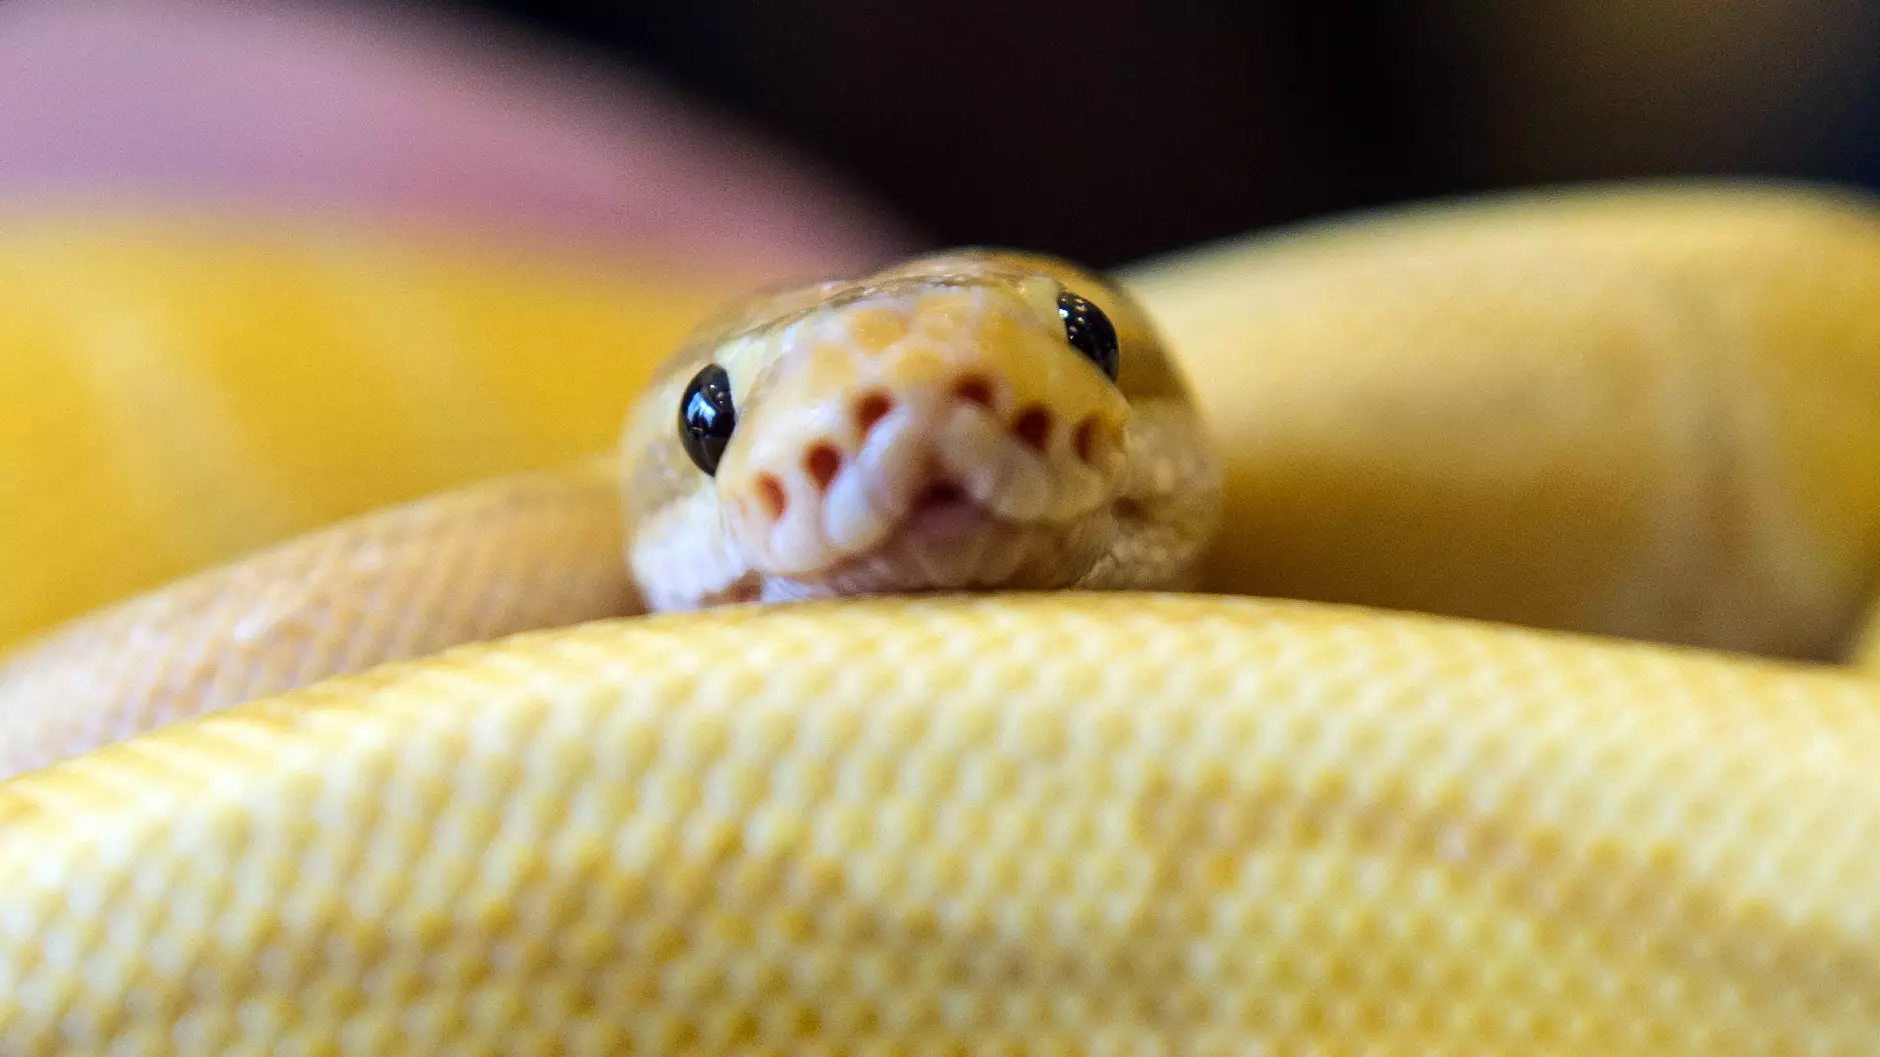 Woman Wakes Up To Find A Royal Python In Her Bed